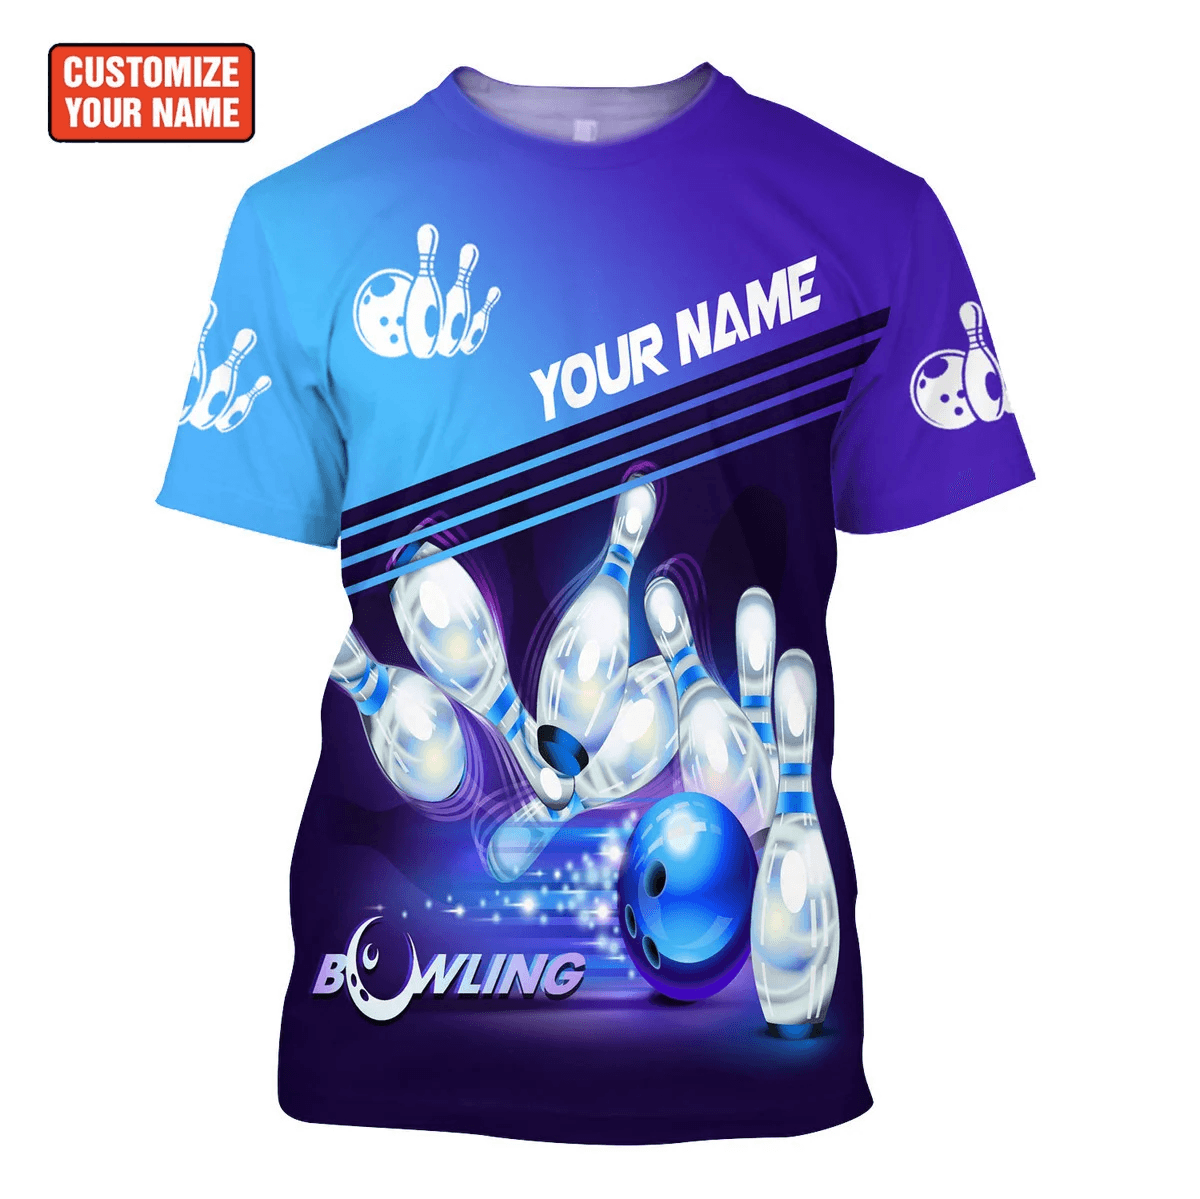 Customized Name Bowling T Shirt, Personalized Blue Bowling Shirt Team Uniform Player - Best Gift For Kids, Bowling Lovers, Bowling Players - Amzanimalsgift